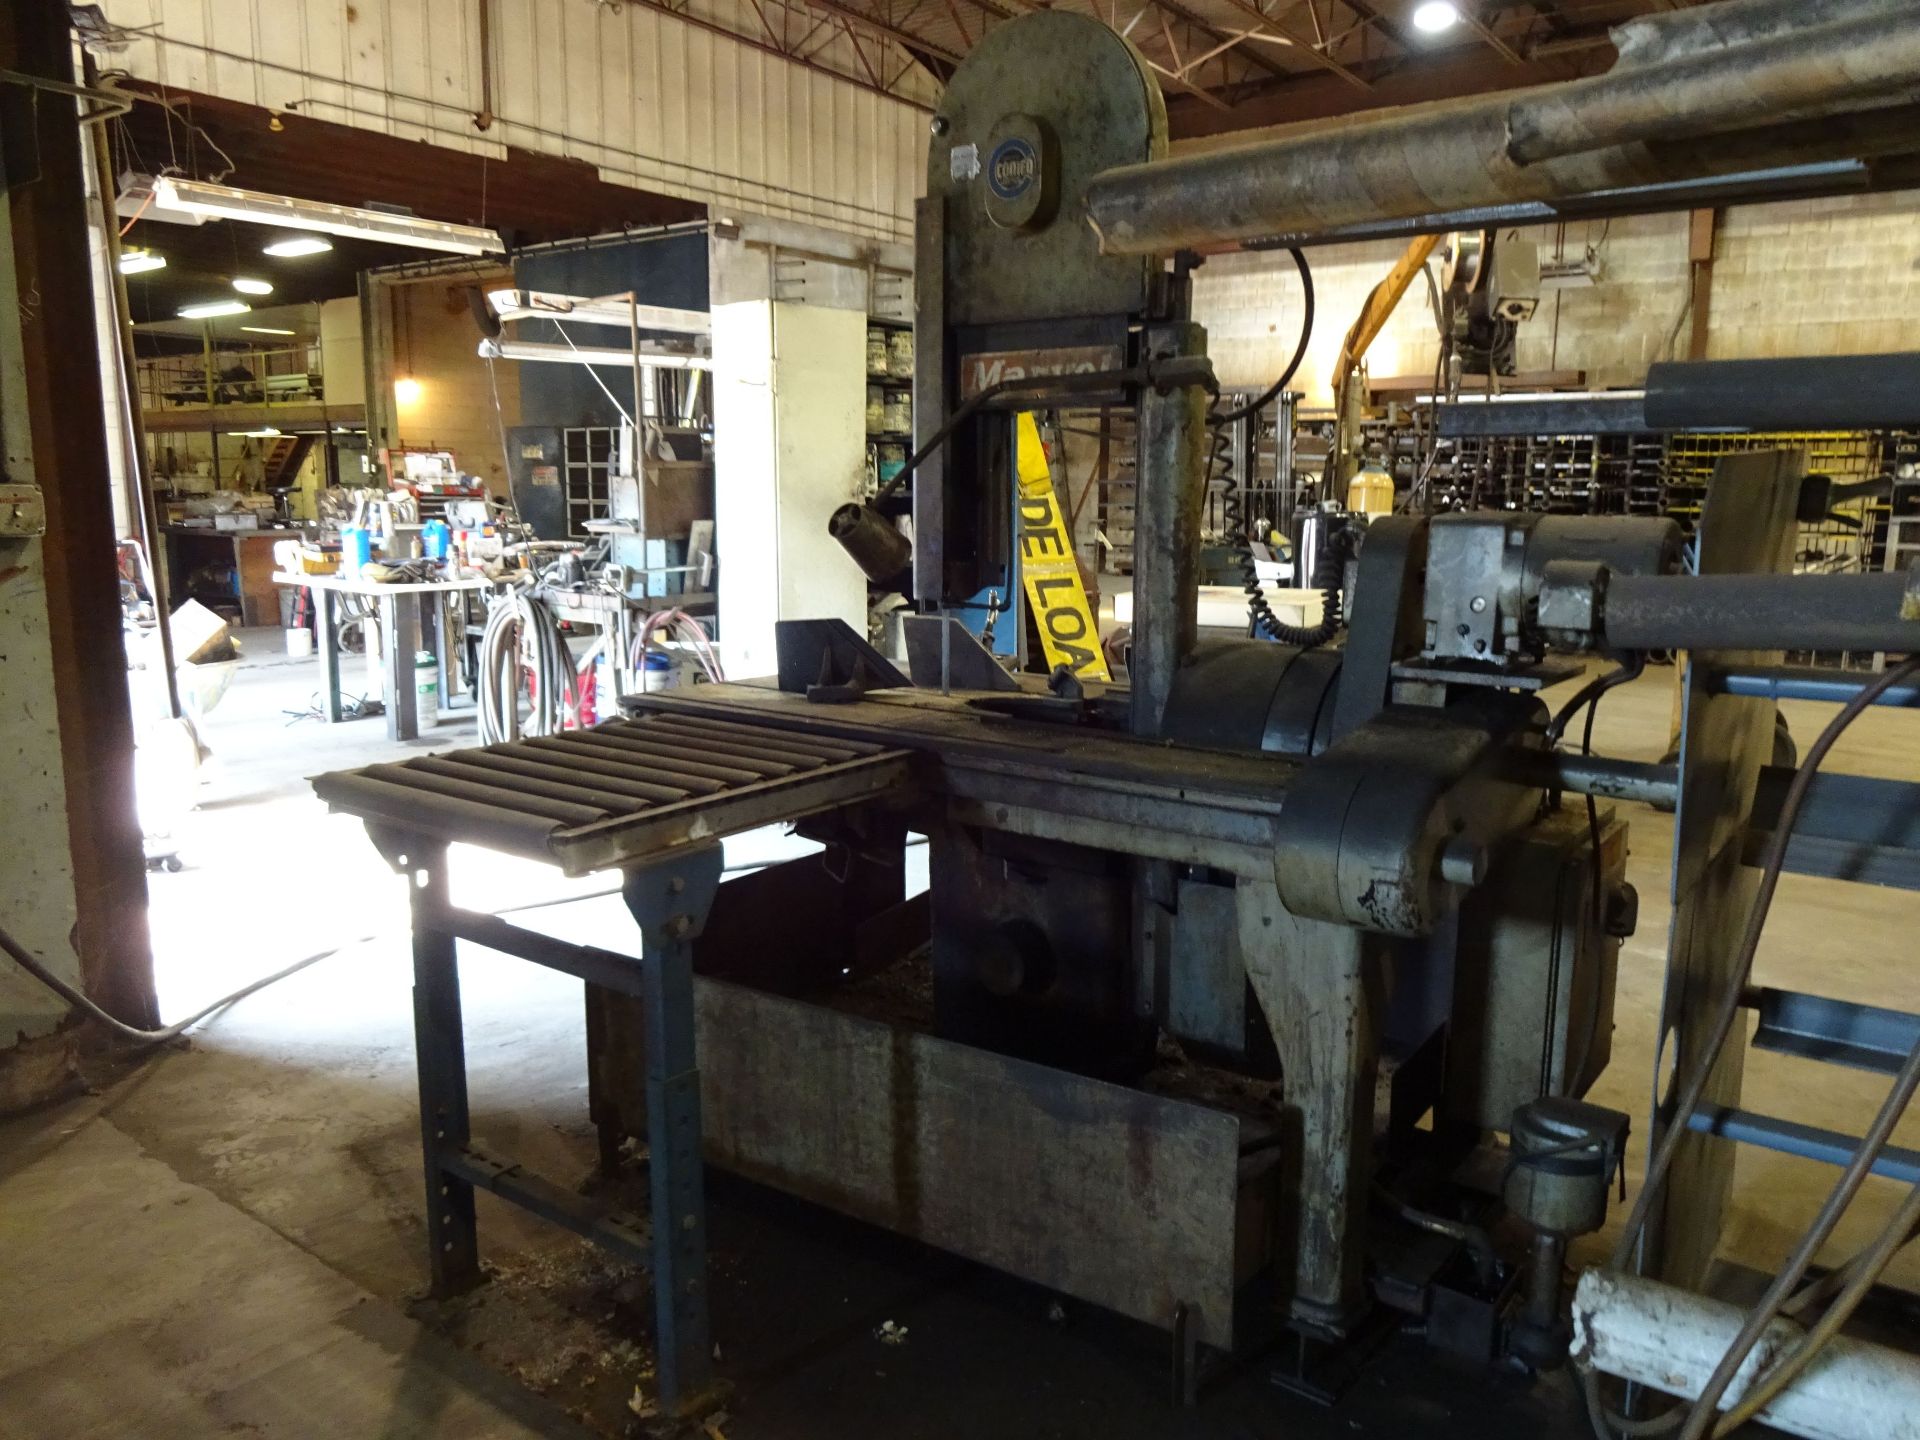 18" X 20" MARVEL SERIES 8/M8/81 VERTICAL BAND SAW; S/N 811948, WITH FEED AND OUT TAKE ROLLER - Image 8 of 8